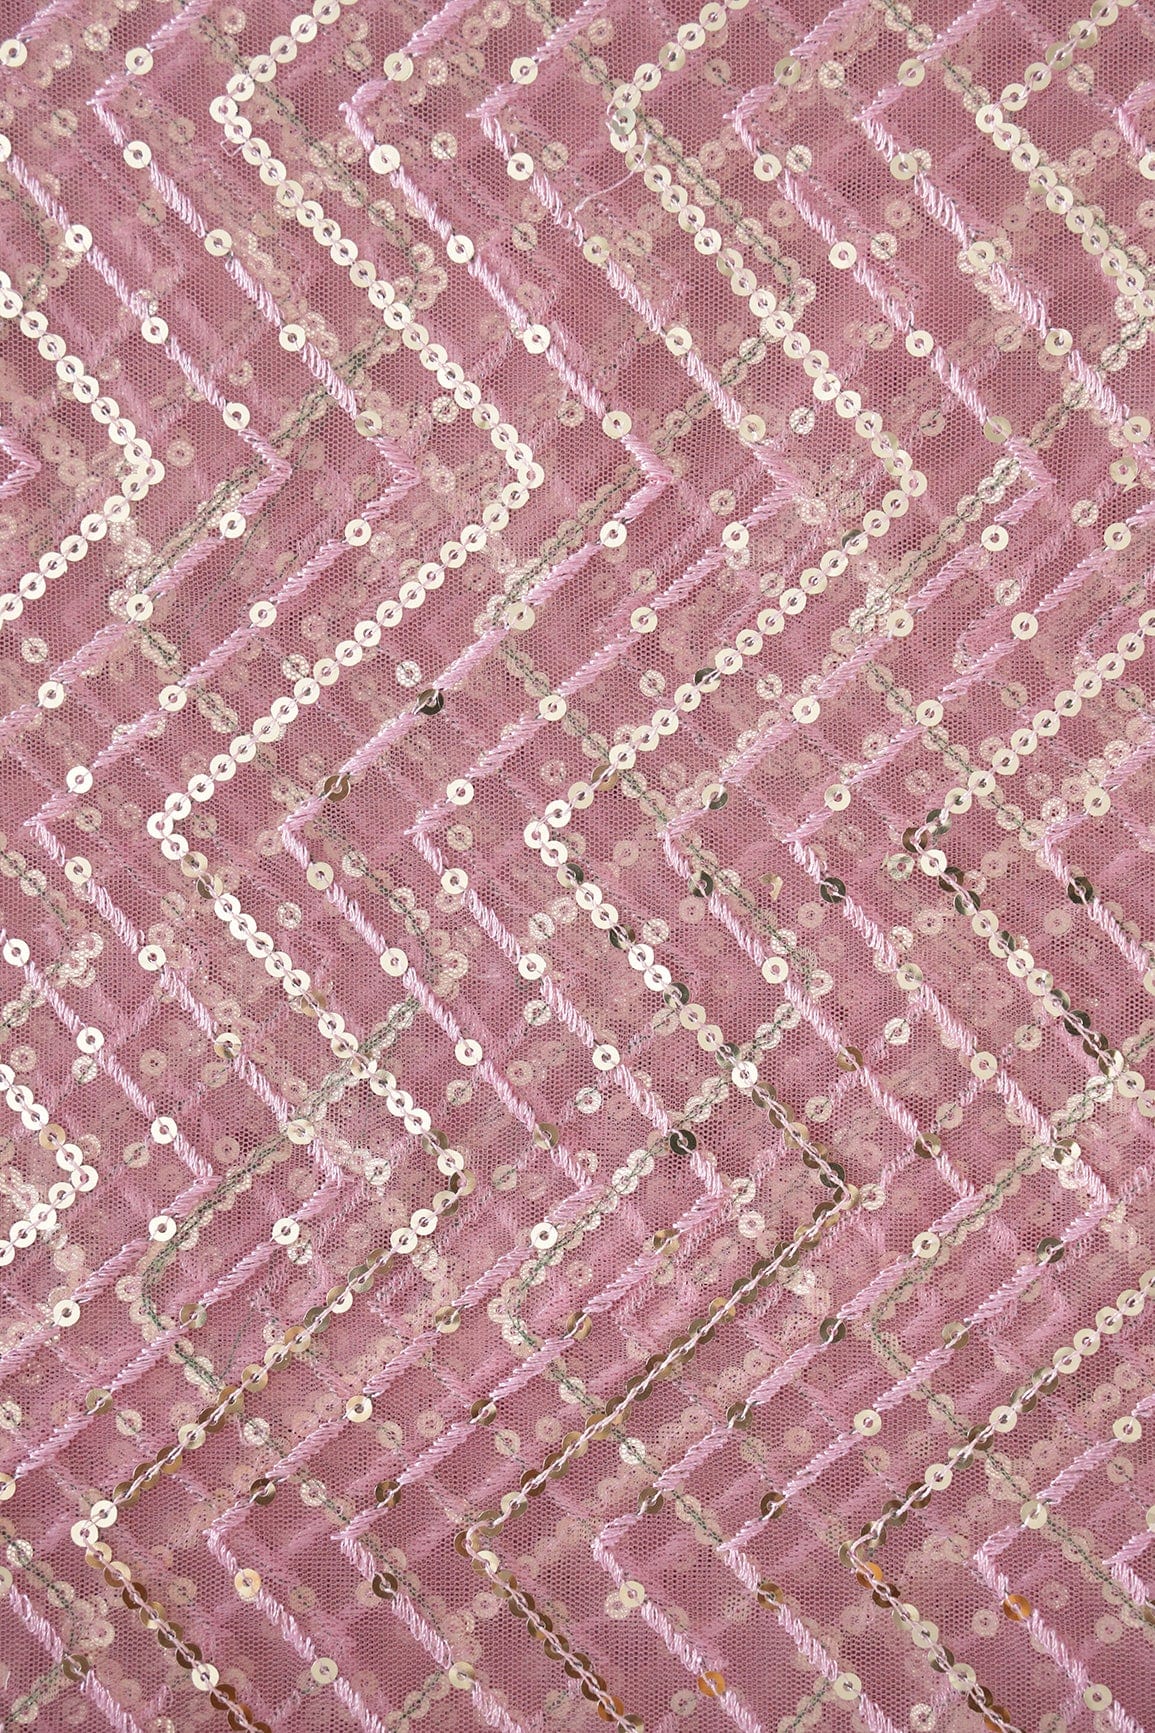 doeraa Embroidery Fabrics 3.50 Meter Cut Piece Of Gold Sequins With Pink Thread Chevron Embroidery Work On Pink Soft Net Fabric